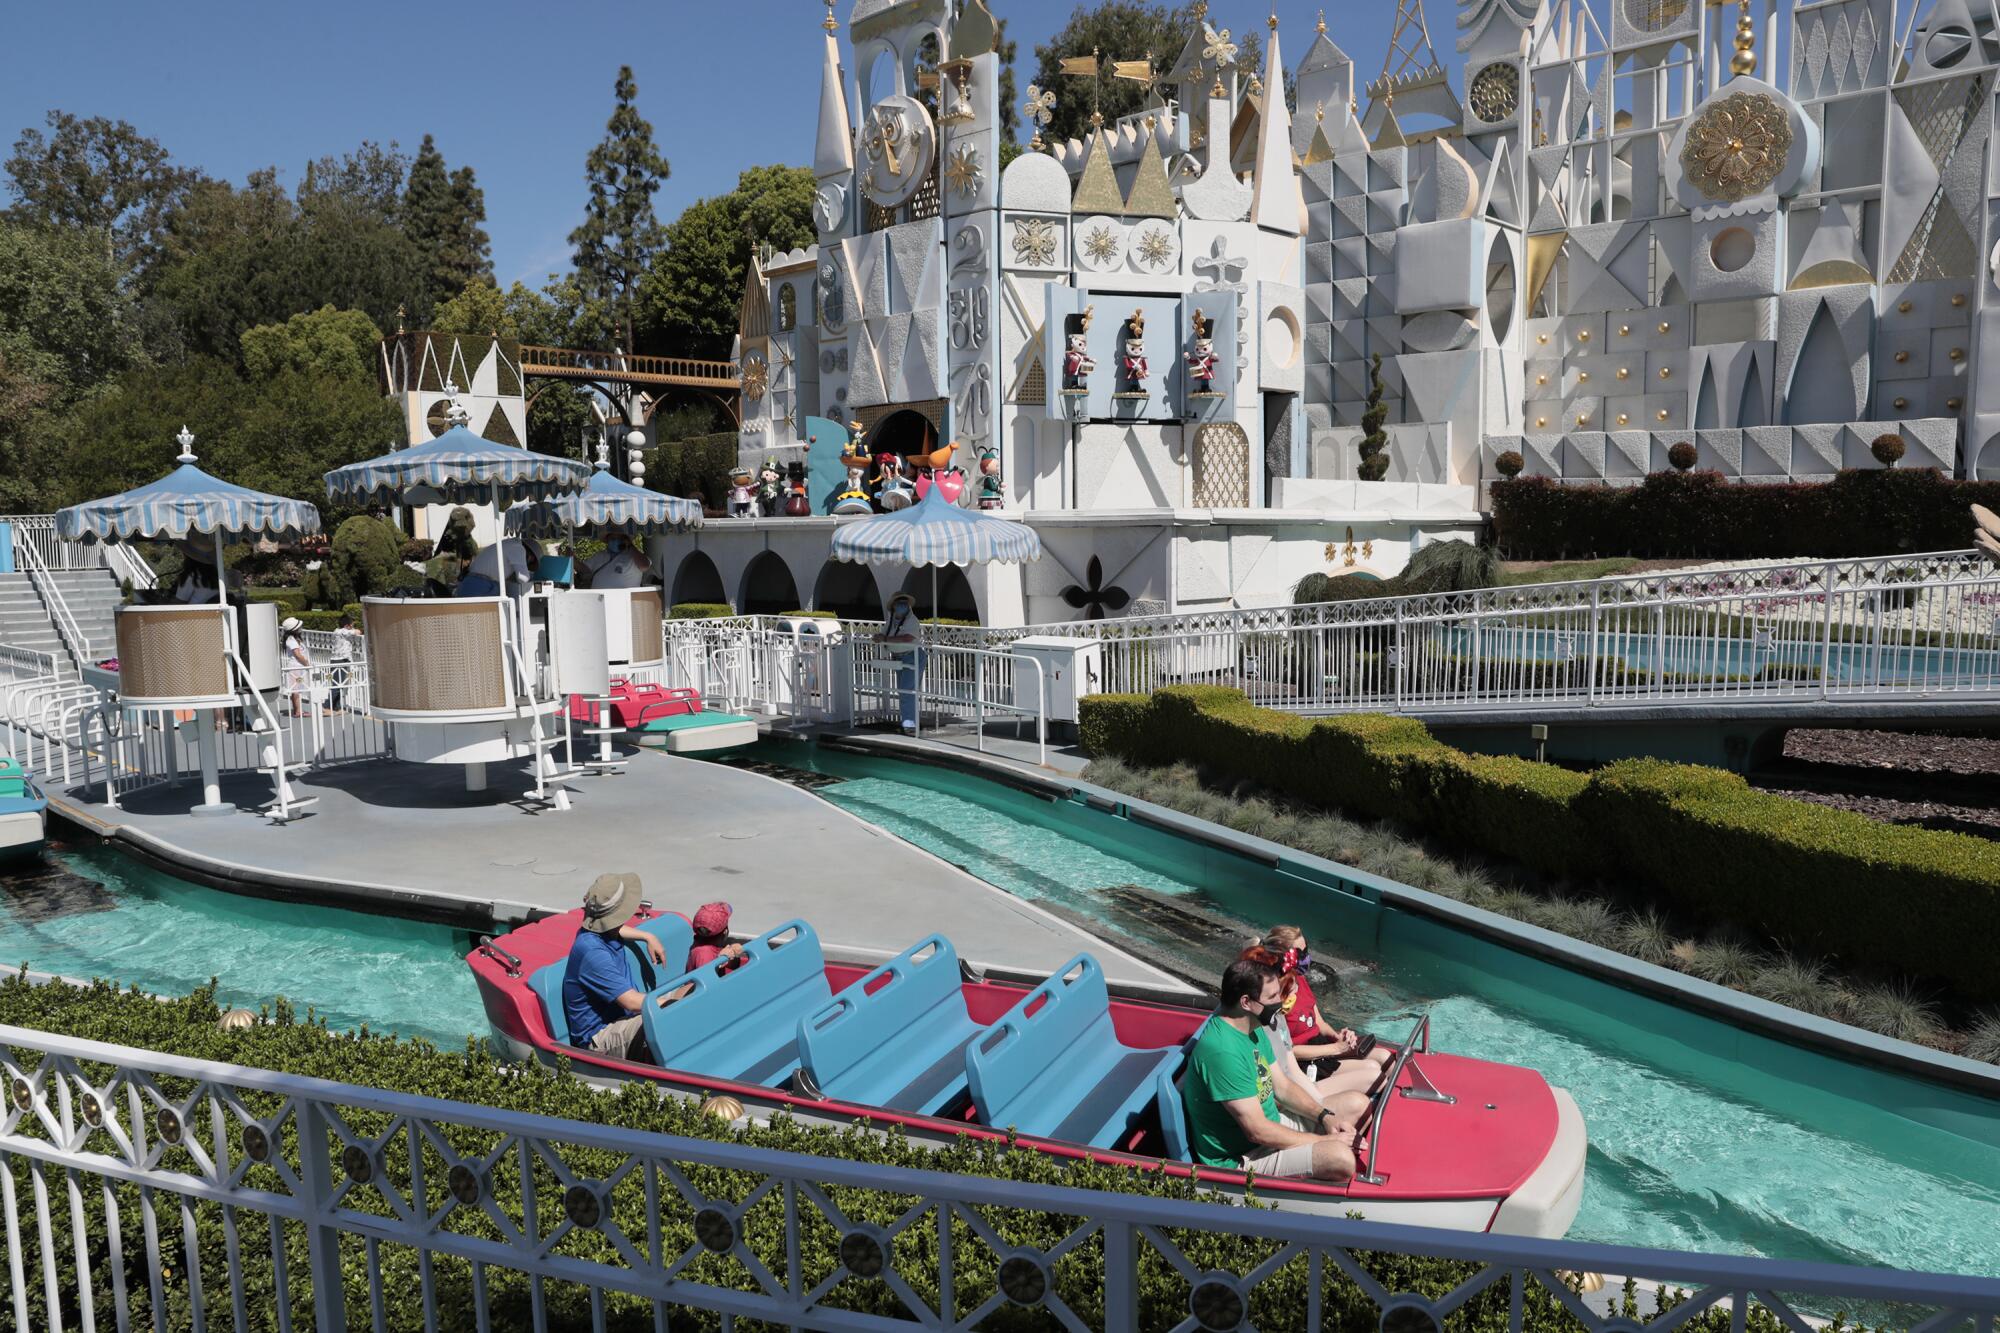 A boat on the Small World ride carries only one couple in the front row and one couple in the fifth row.